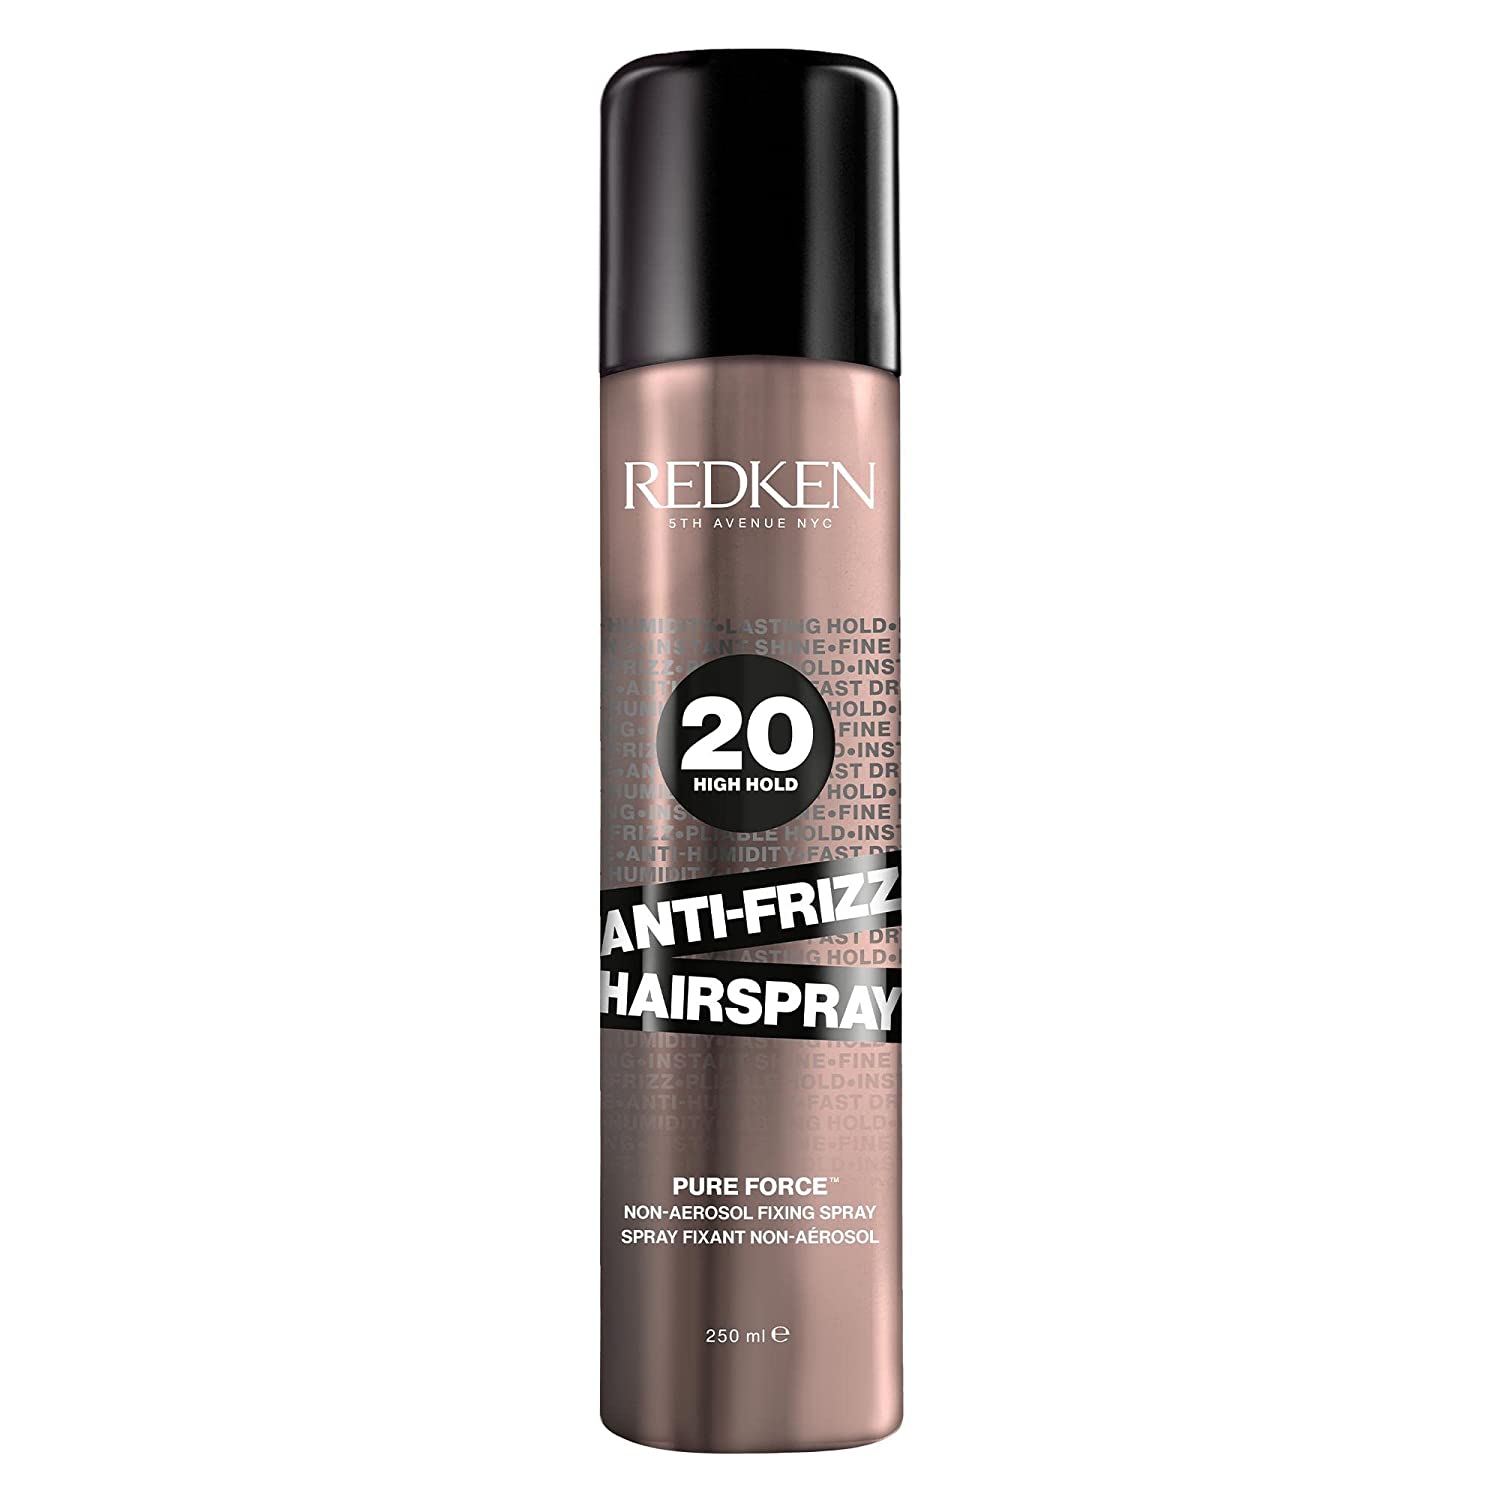 Redken Aerosol-free hair spray against frizz for all hair types, long-lasting and quick-drying, anti-moisture, anti-frizz hair spray, 1 x 250 ml